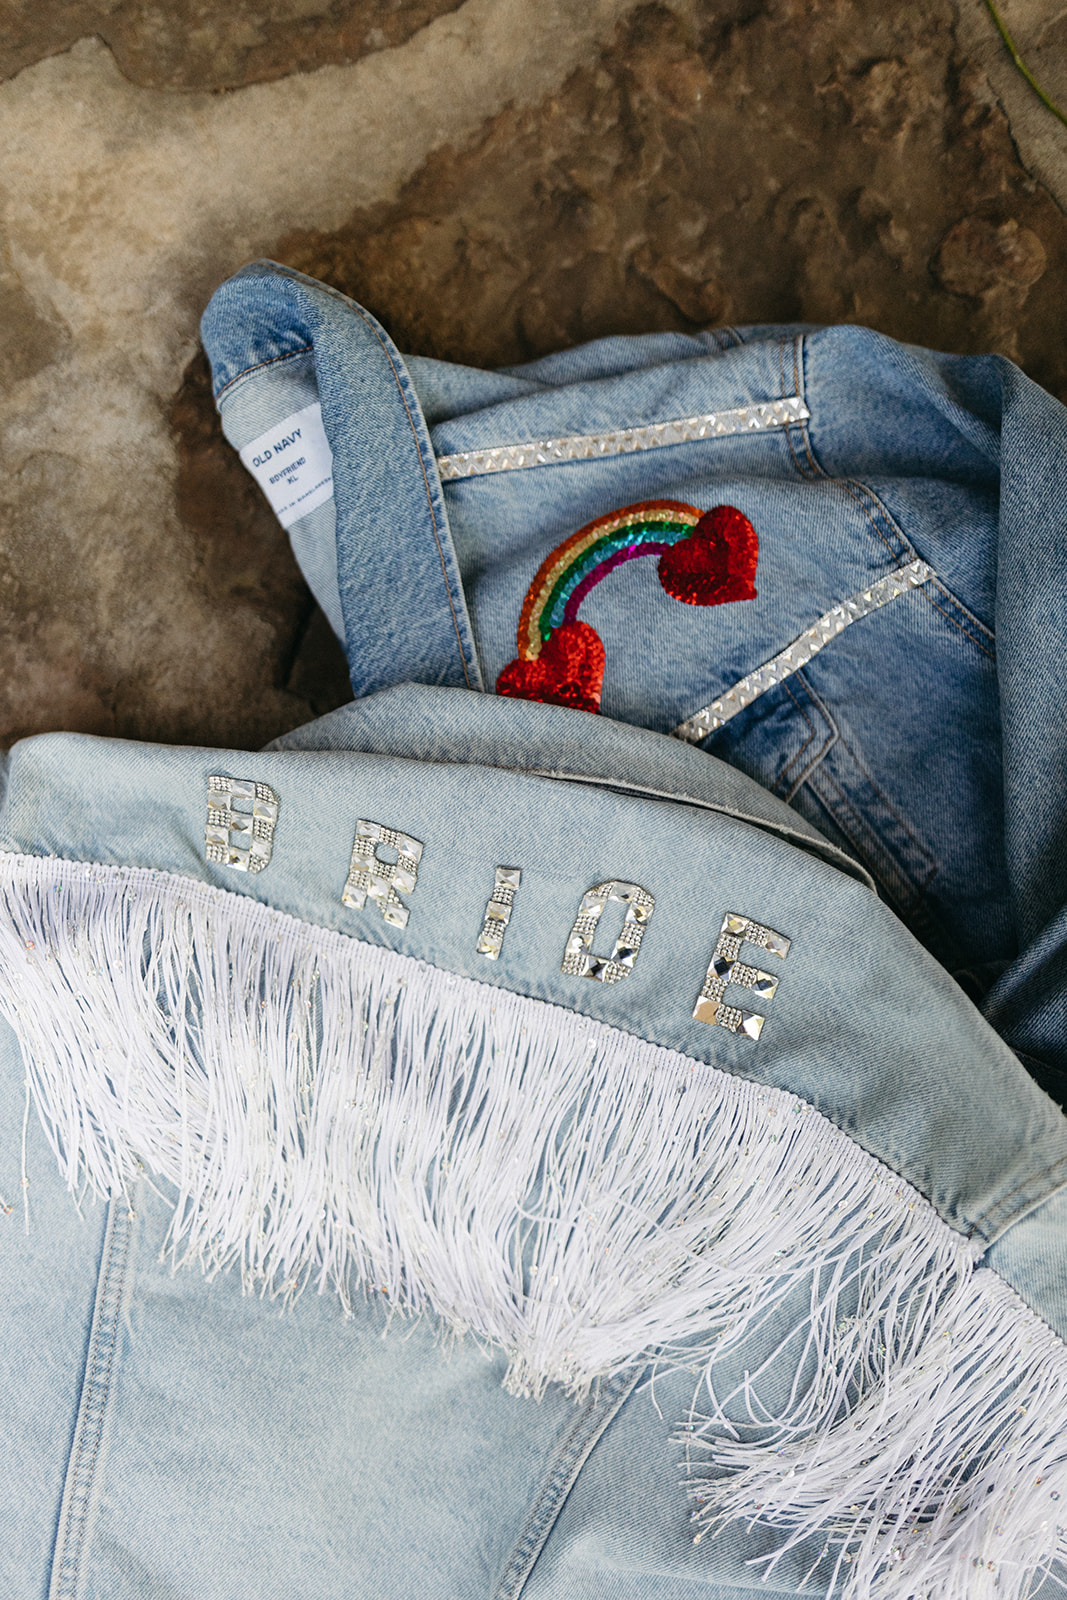 Denim jackets for two brides. One has silver letters spelling out bride with white fringe underneath. The other jacket has a sequin rainbow and two red hearts.